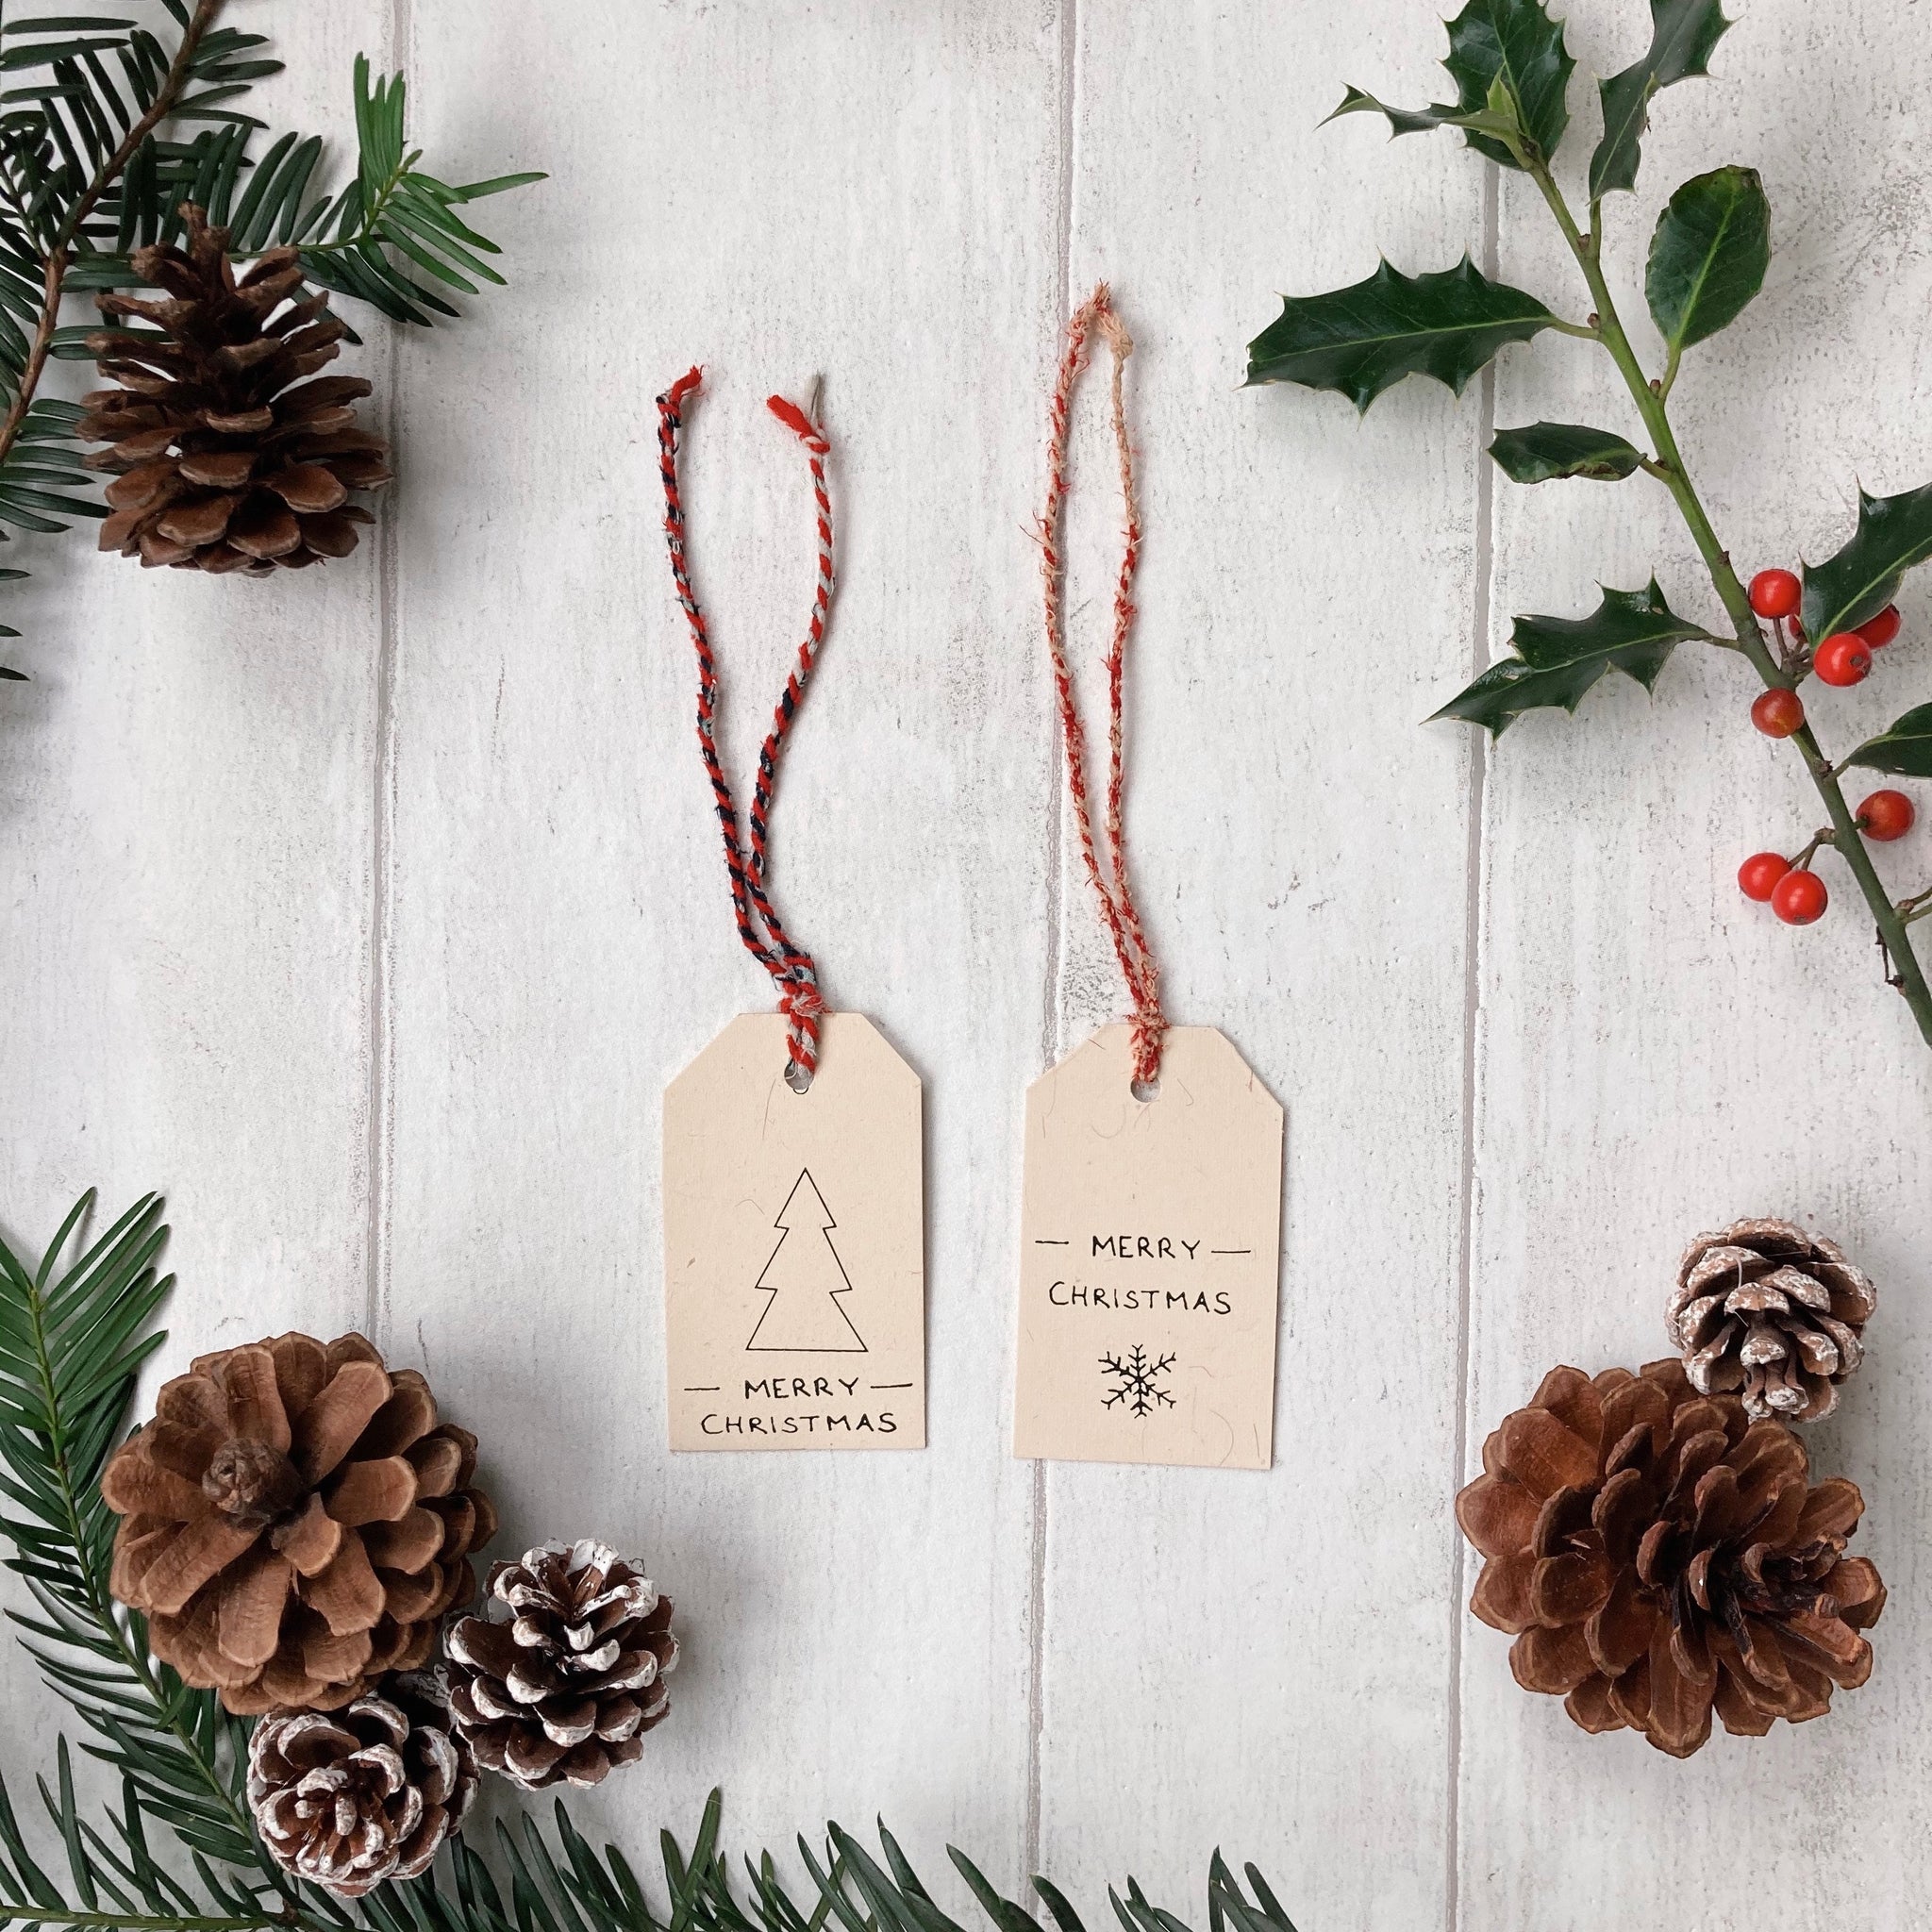 Up-cycled Gift Tags